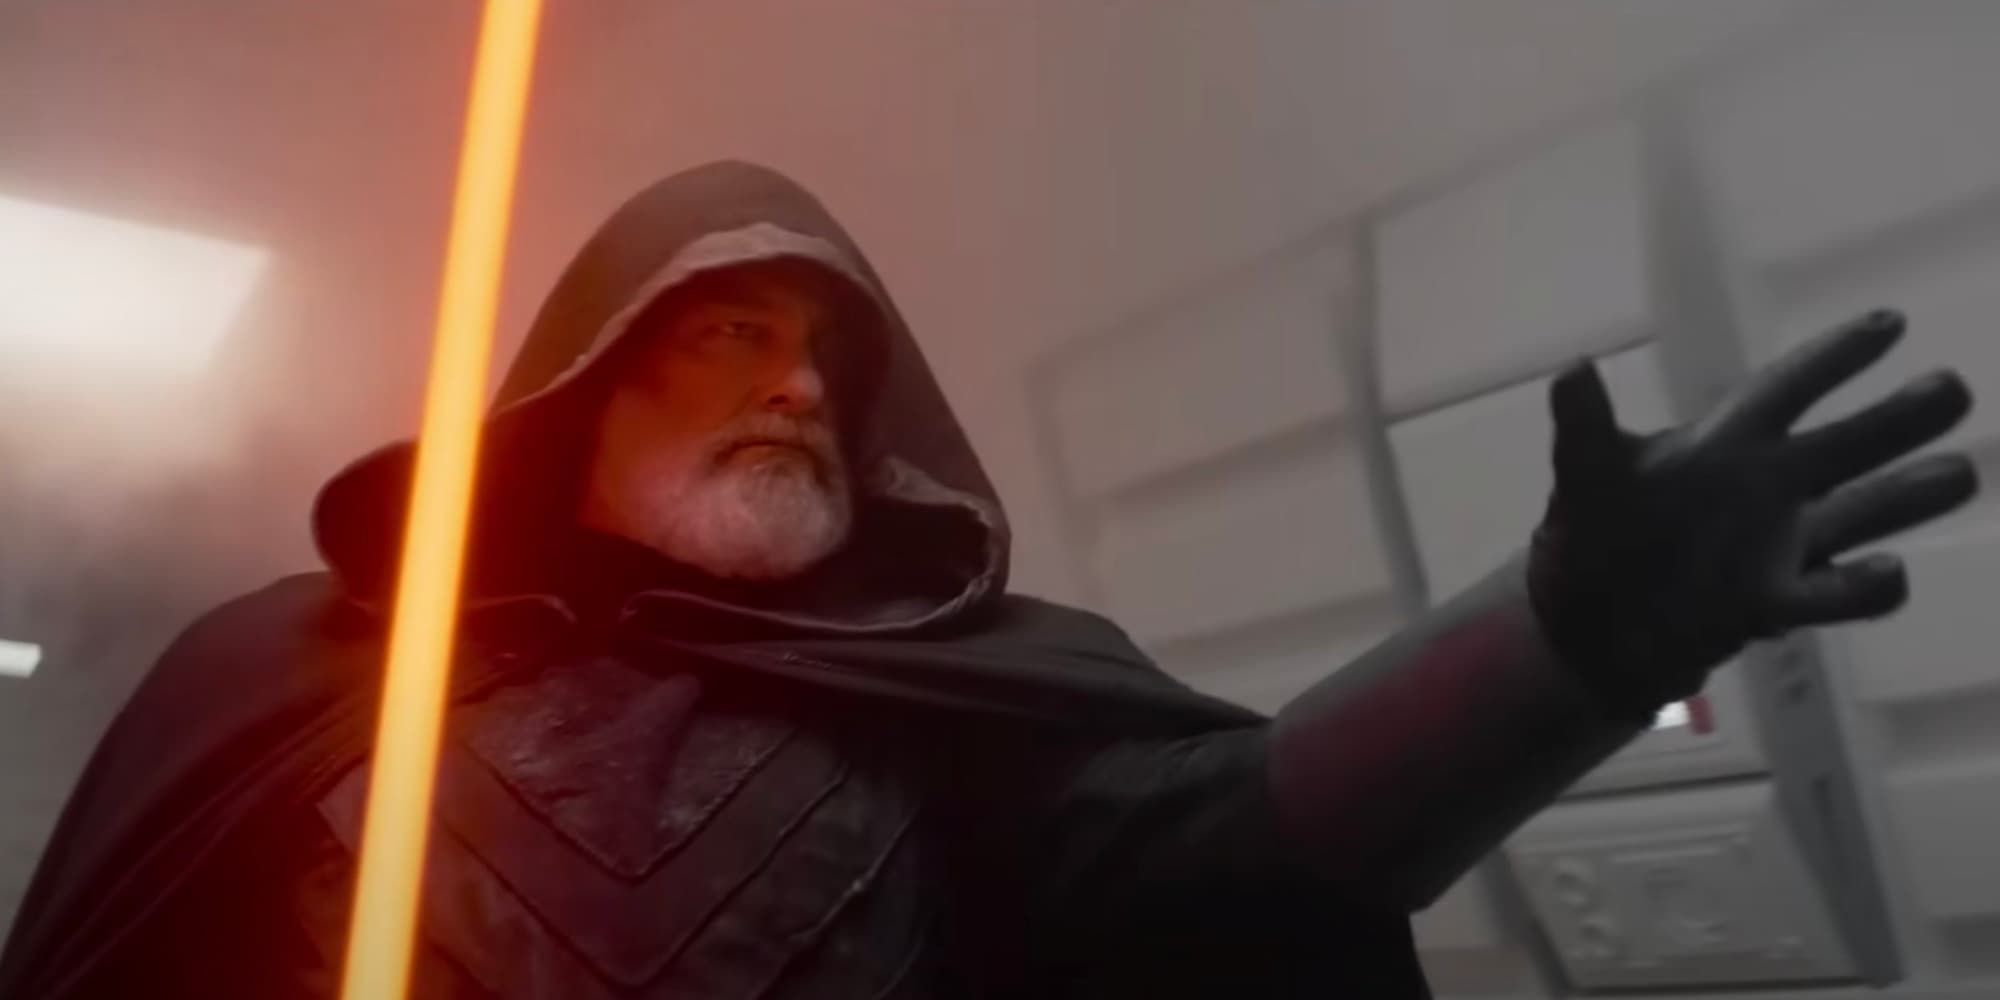 Baylan Skill wields an Orange Lightsaber as he reaches out to use a force choke in the trailer for Ahsoka.